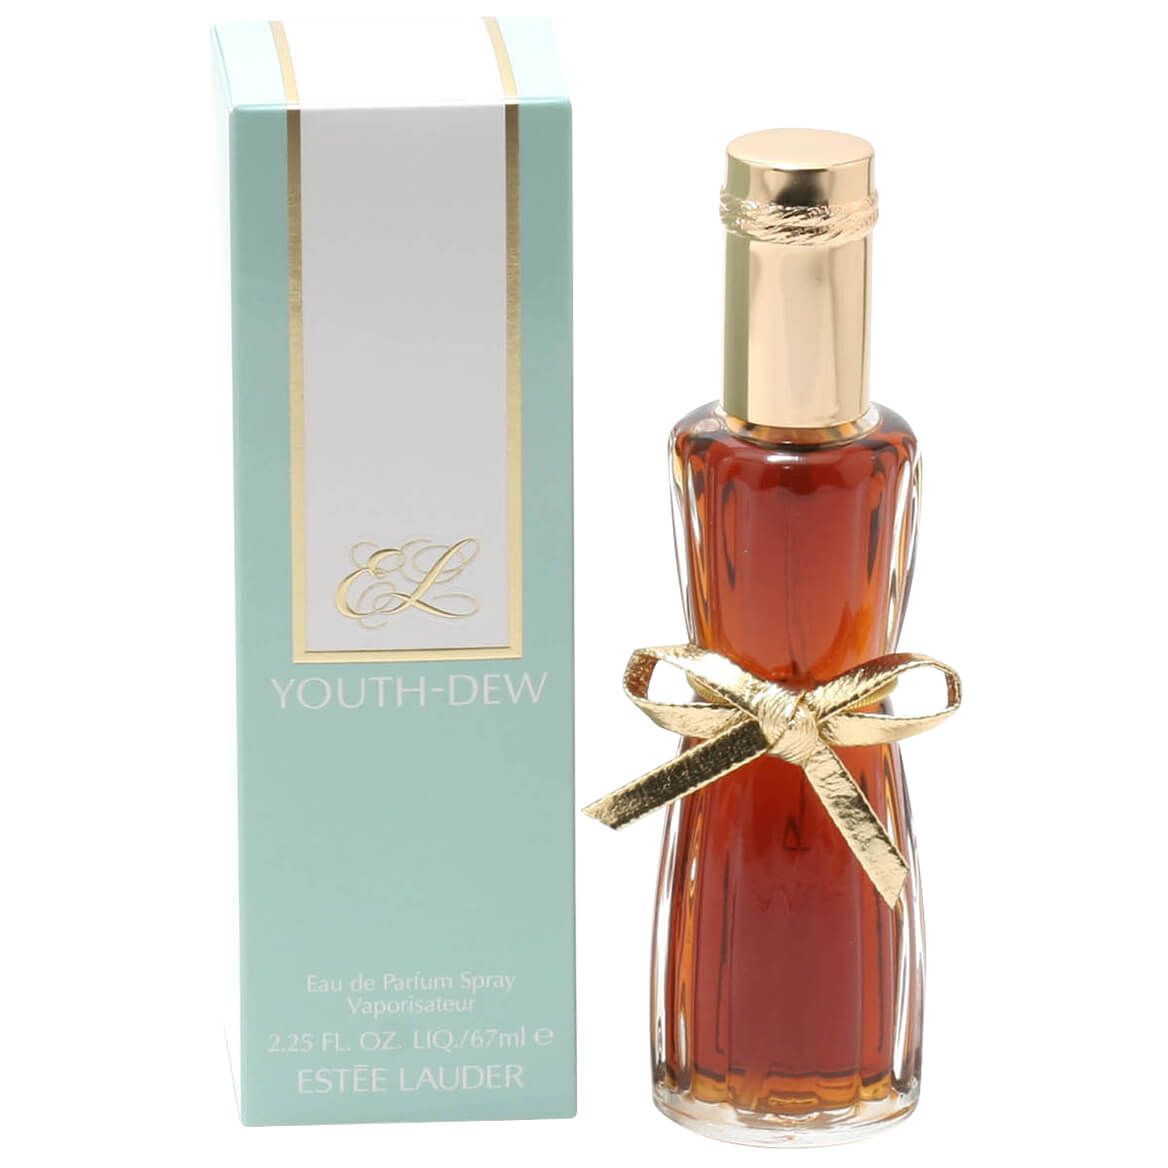 Youth Dew by Estee Lauder for Women EDP, 2.25 fl. oz. + '-' + 377184